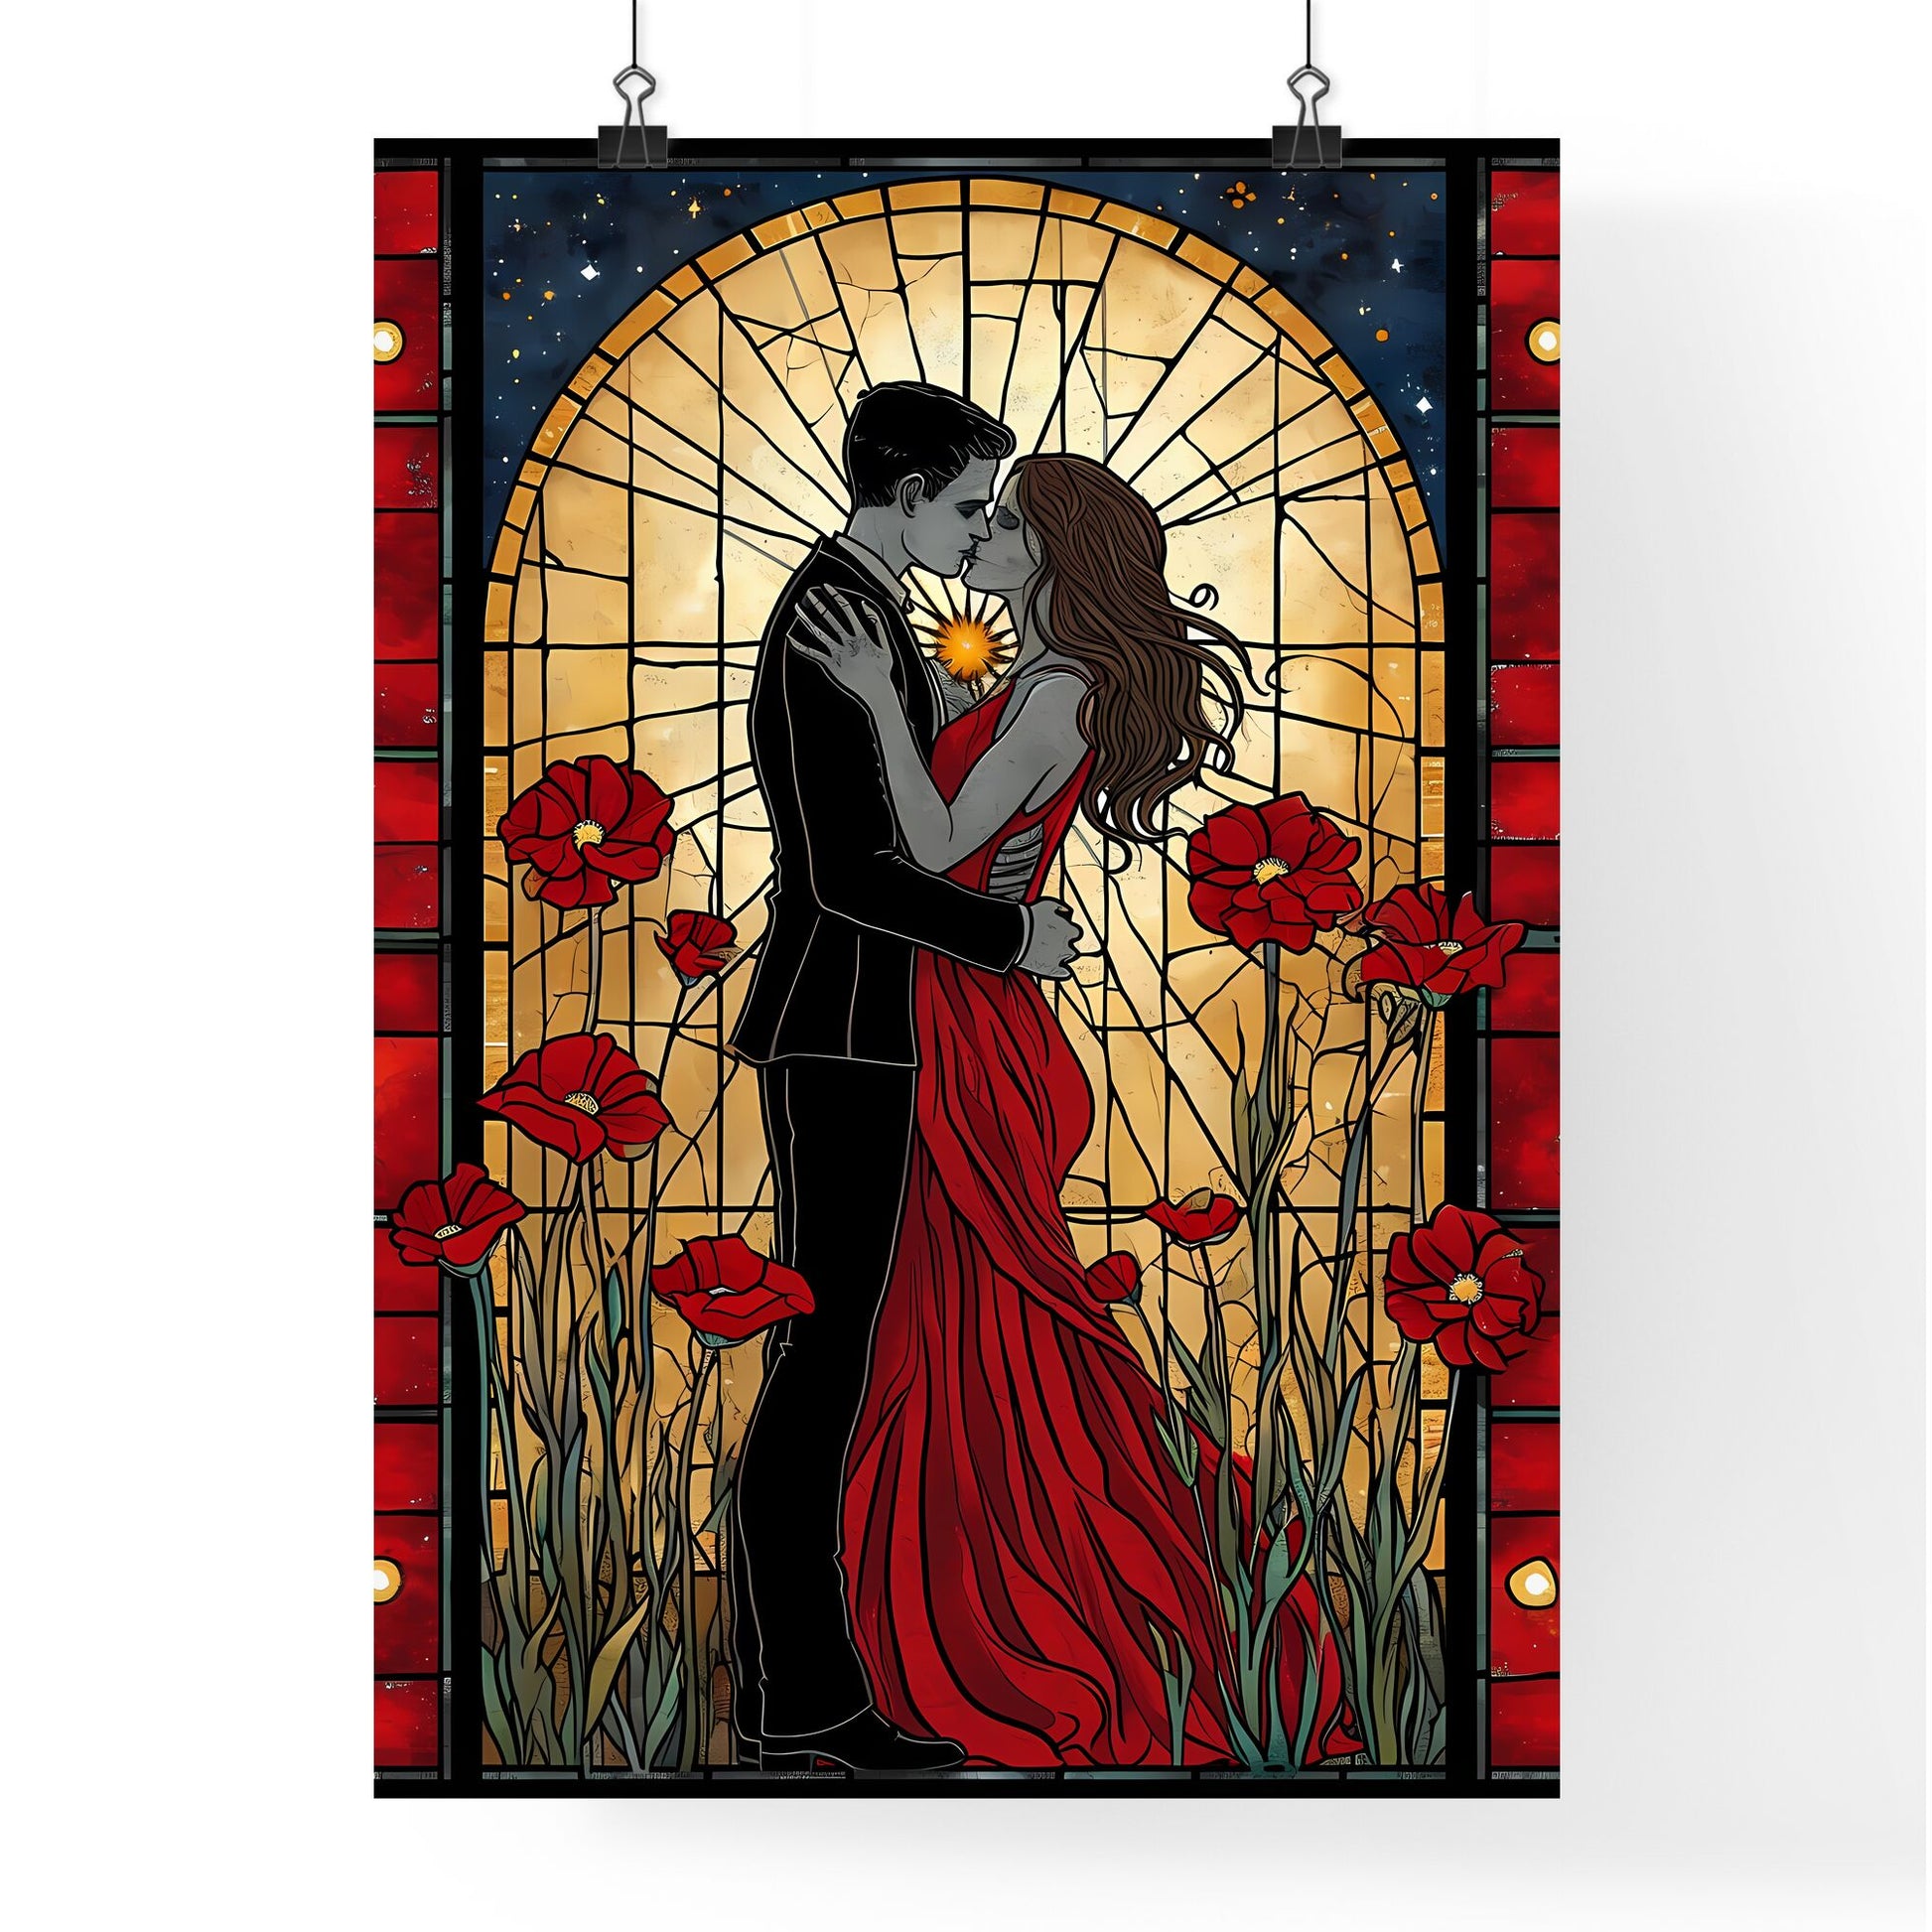 A skeleton slow dances with a beautiful - Art print of a man and woman in a red dress hugging in front of a stained glass window Default Title